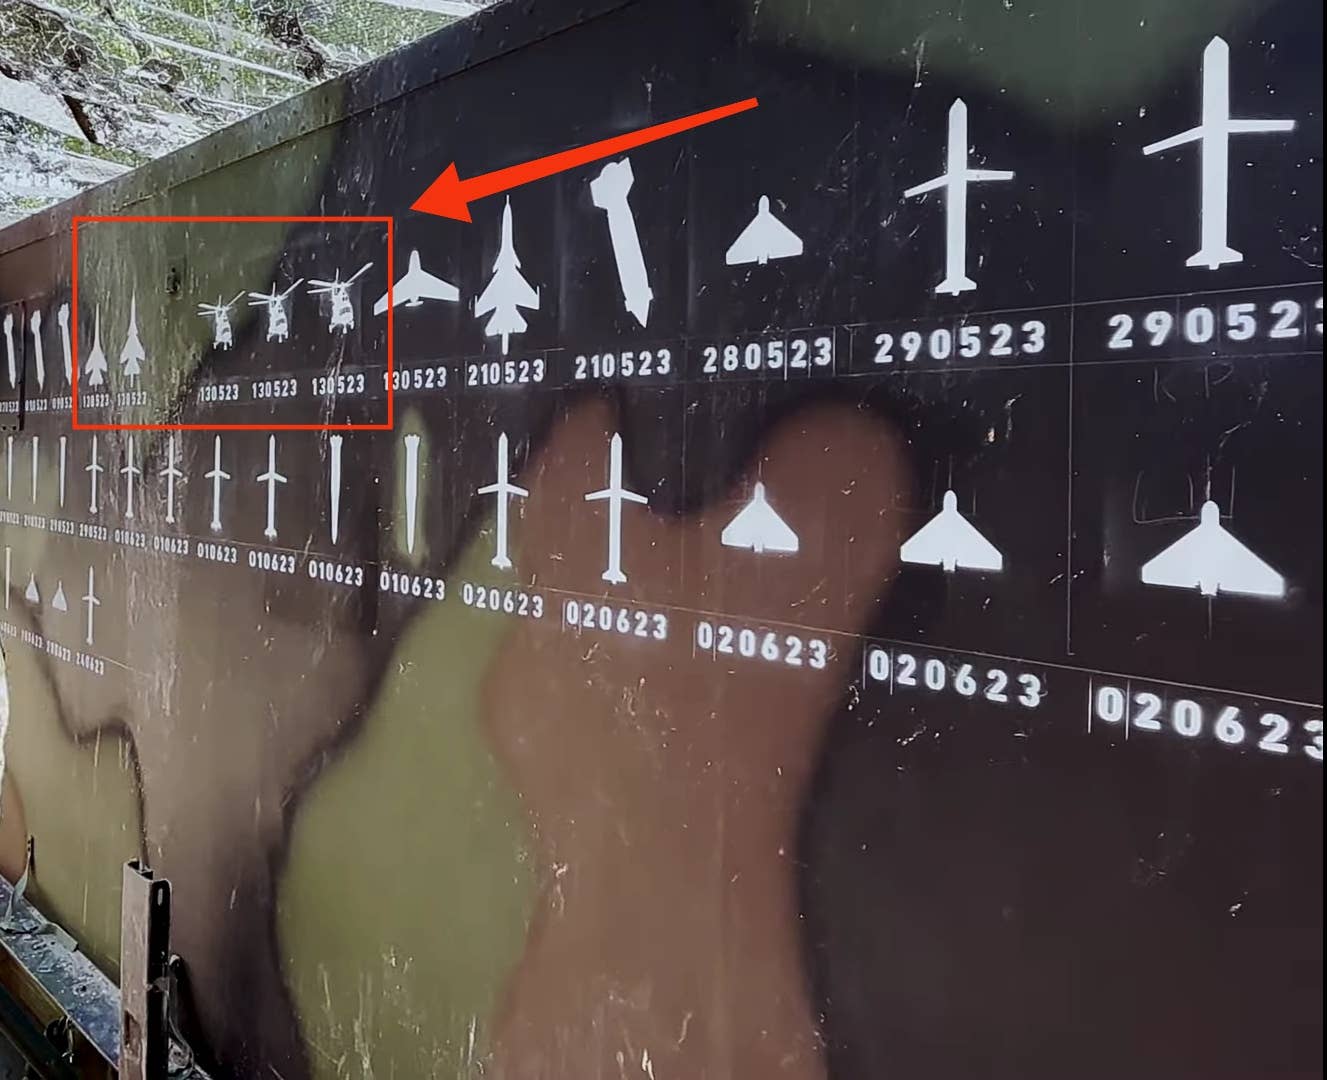 A screen capture of the Ukrainian Air Force video shows images of three Russian helicopters and two Russian fighters painted on the side of a Patriot air defense battery. The three helicopter and two jet images bear the date May 13. (Defense Industry of Ukraine image)